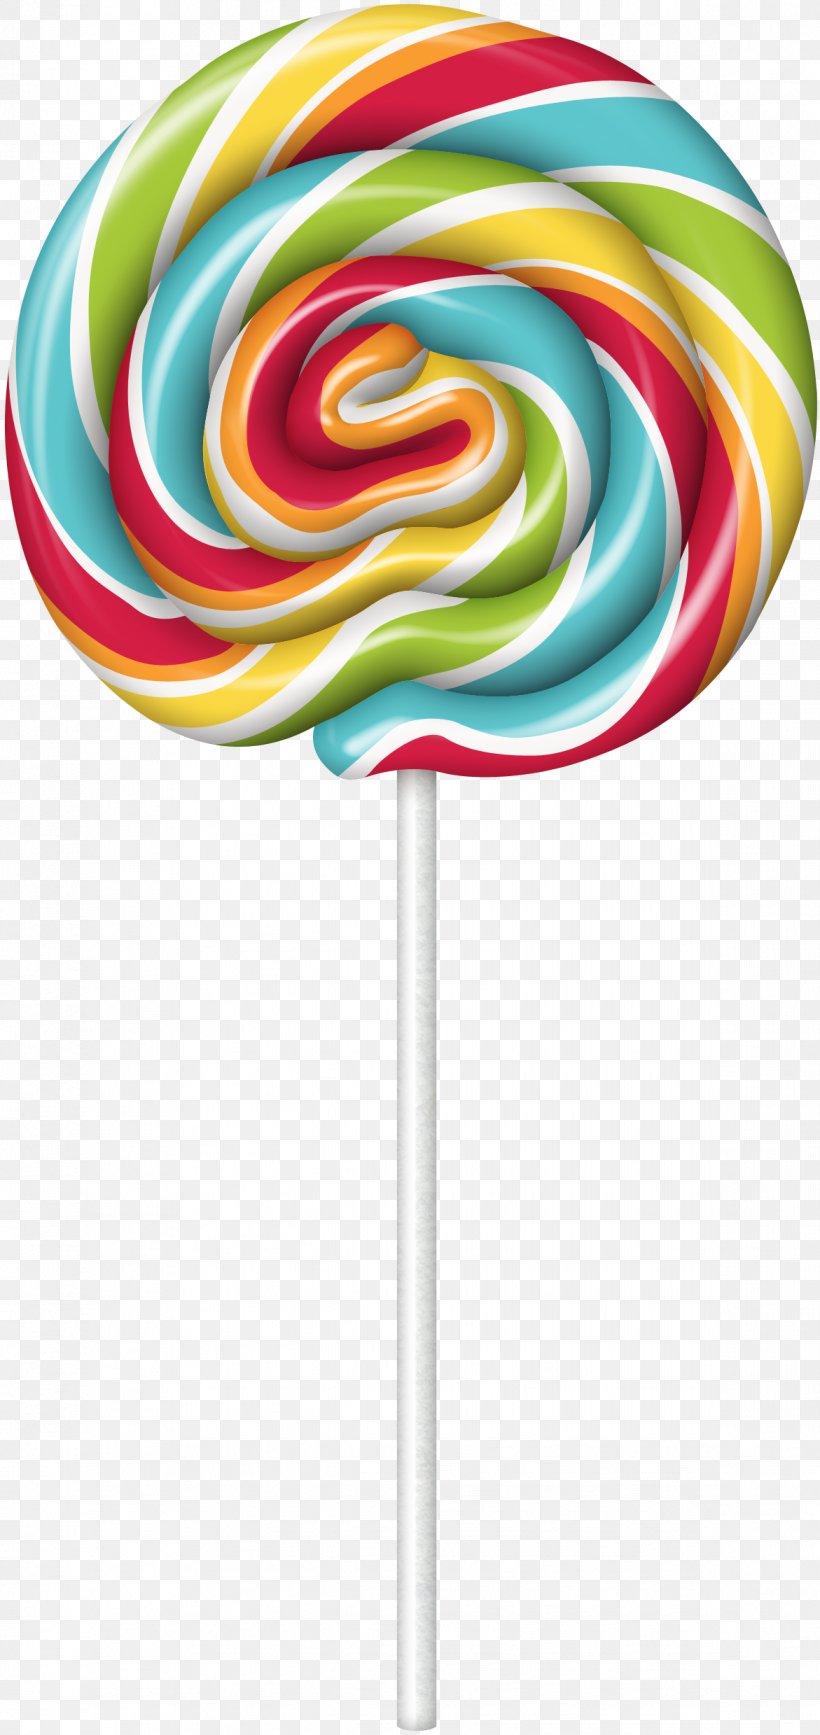 Lollipop Candy Free Content Clip Art, PNG, 1171x2479px, Lollipop, Candy, Confectionery, Copyright, Food Download Free